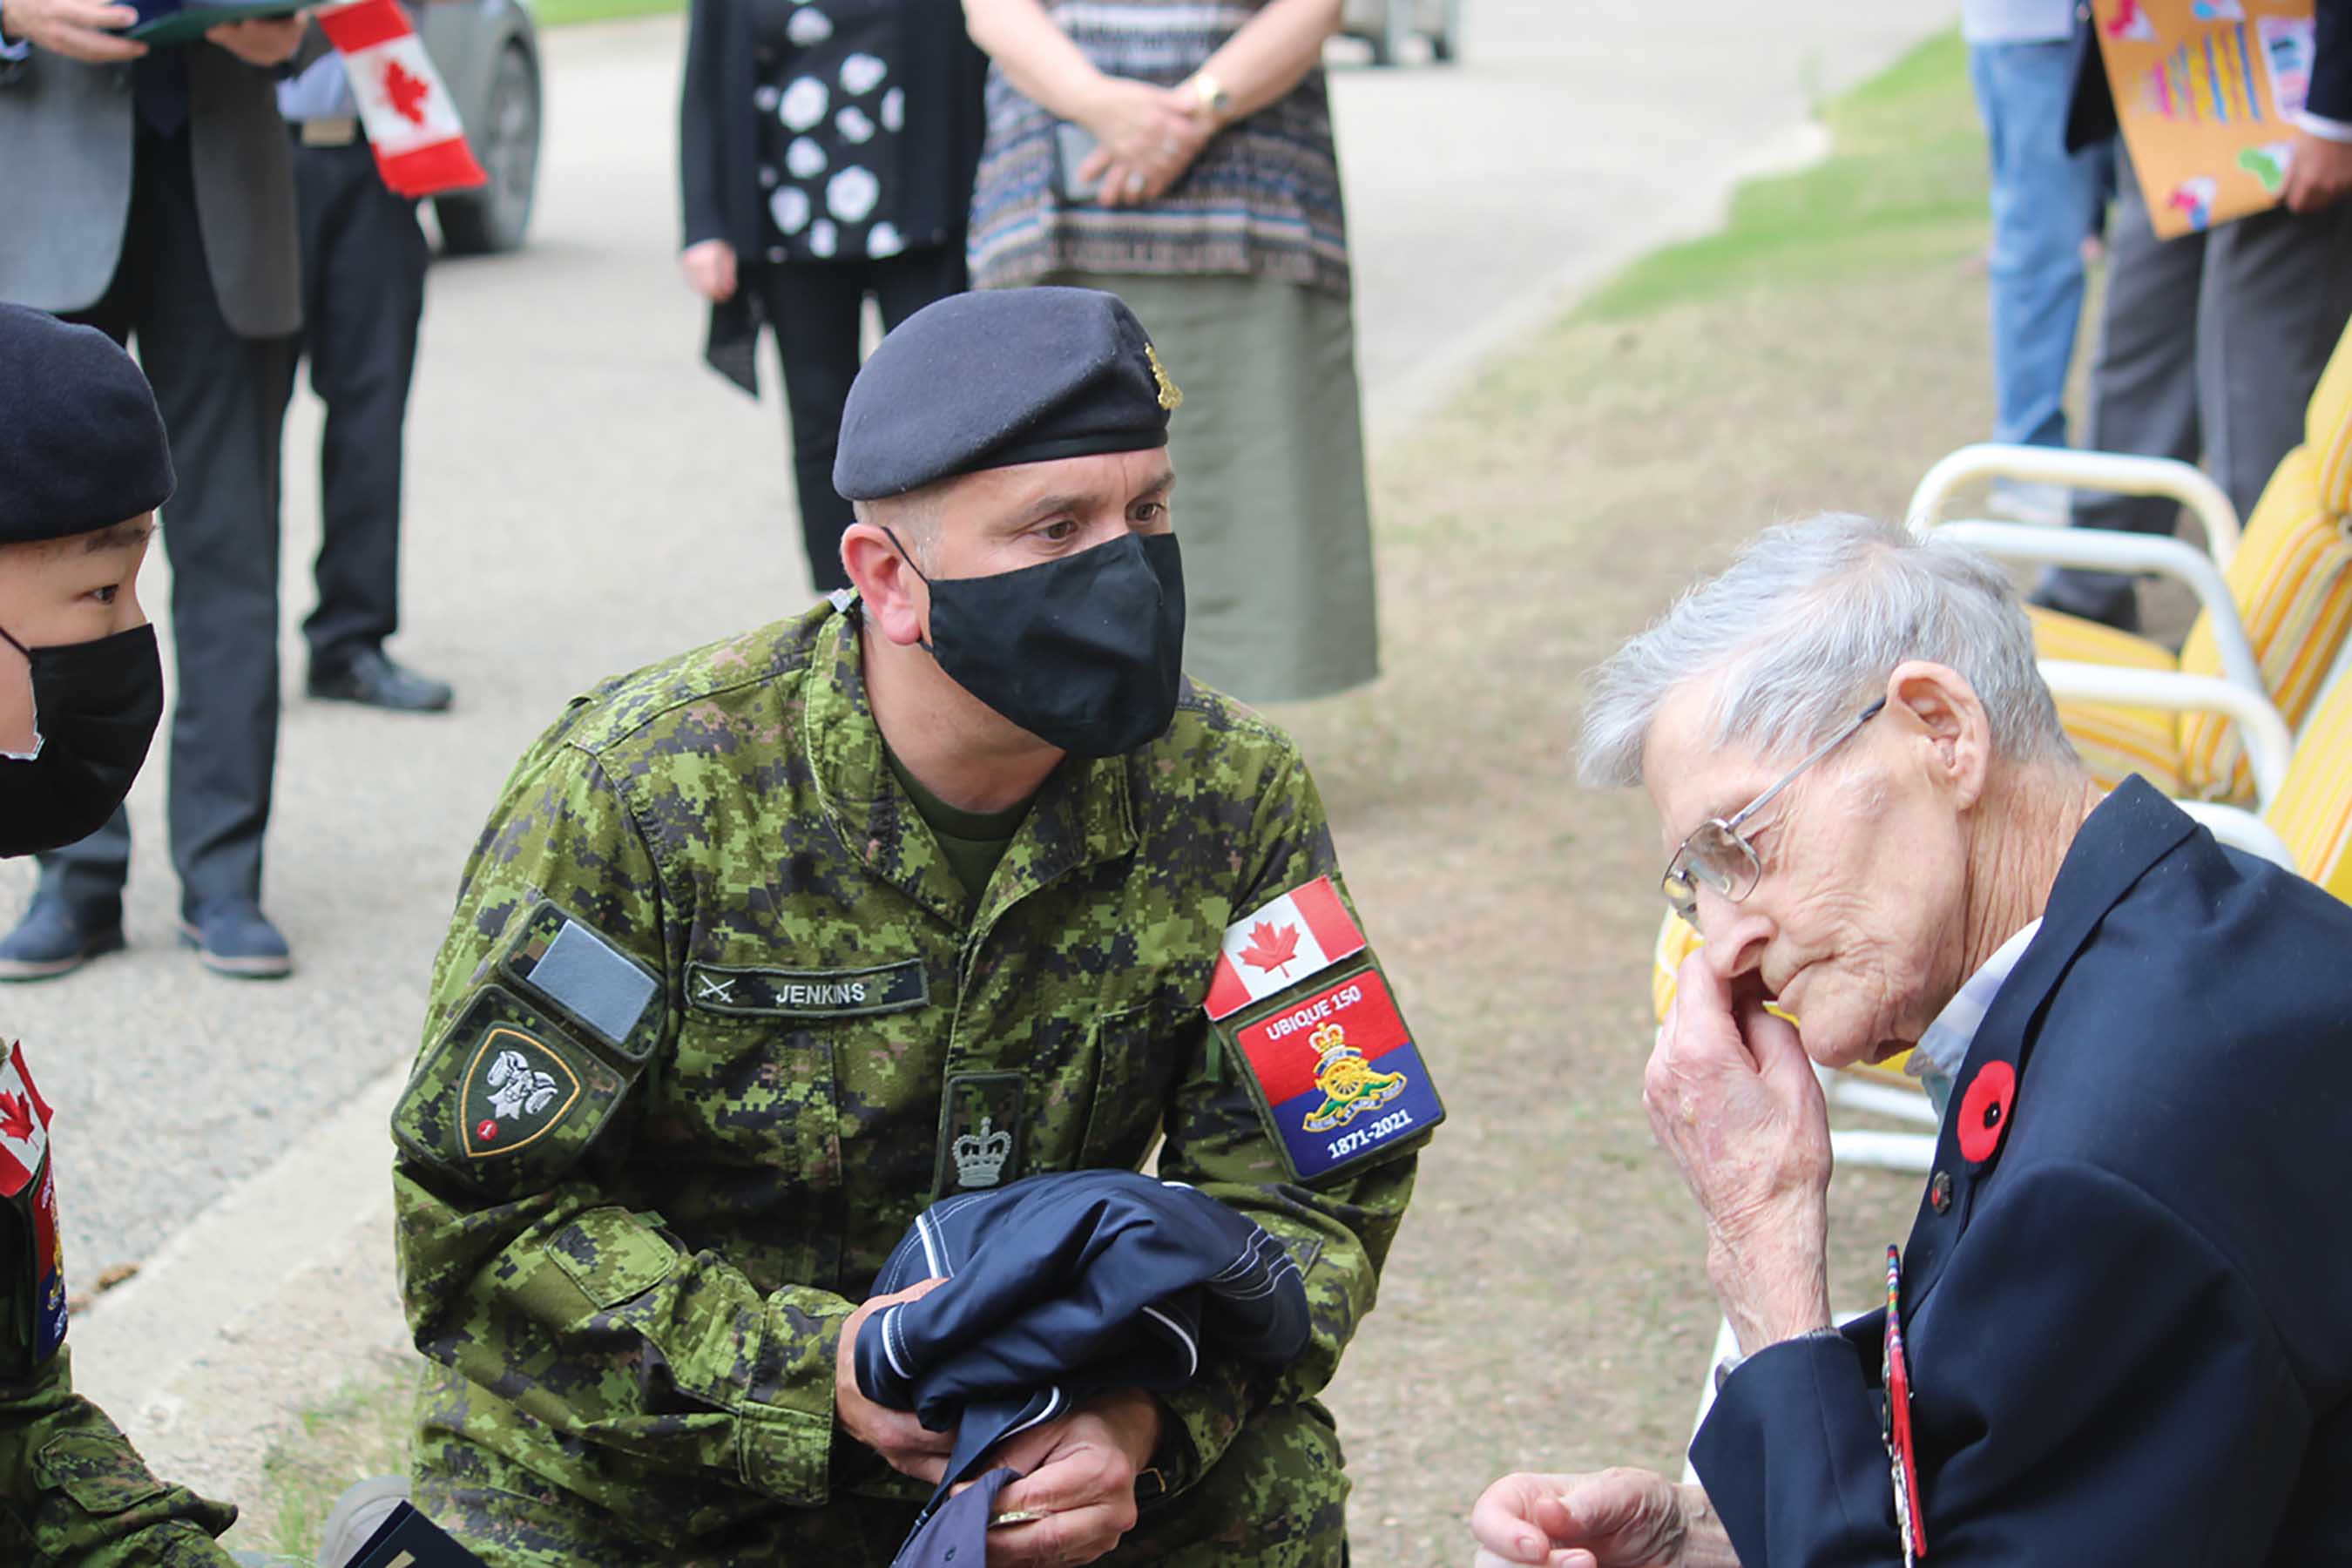 Captain James Lee and Warrant Officer Mike Jenkins of 1st RCHA, CFB Shilo, sharing a personal moment with Les as they talked about D-Day and the Second World War. Les is seen wiping away a tear.